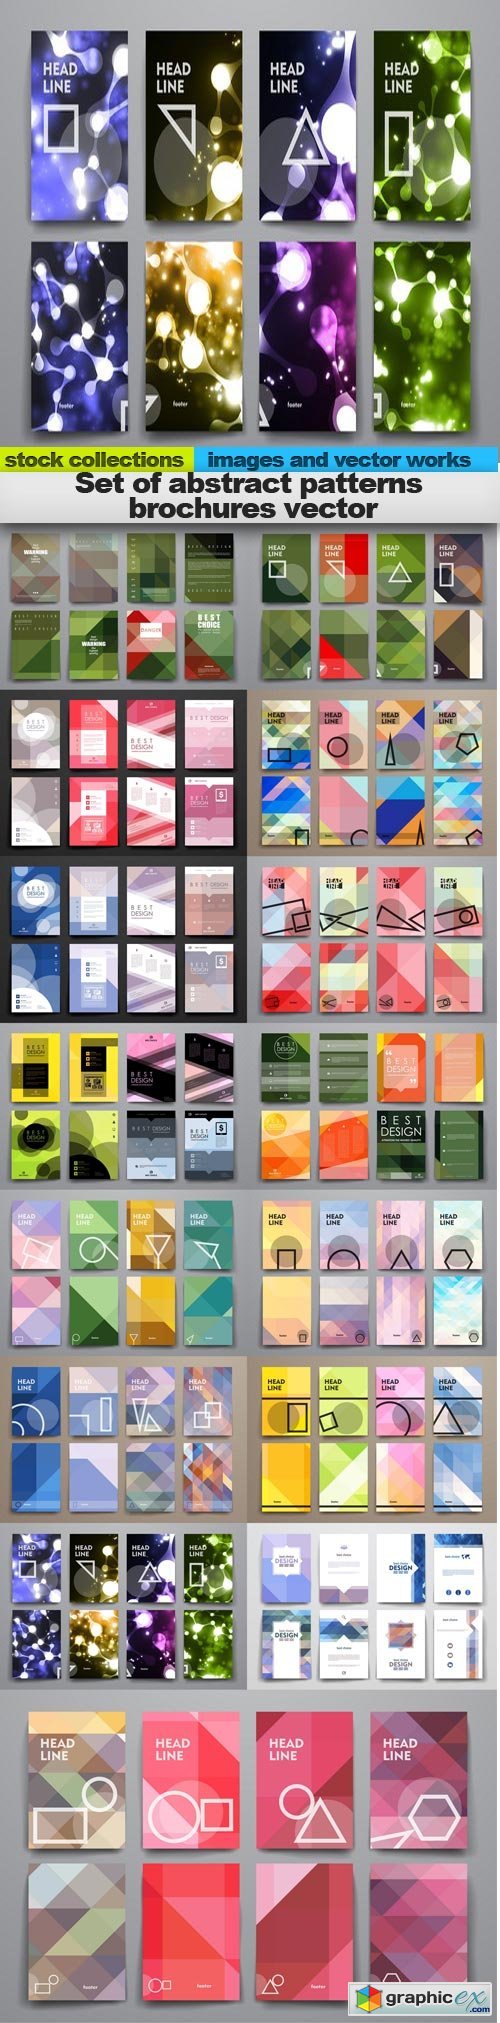 Set of abstract patterns brochures vector, 15 x EPS